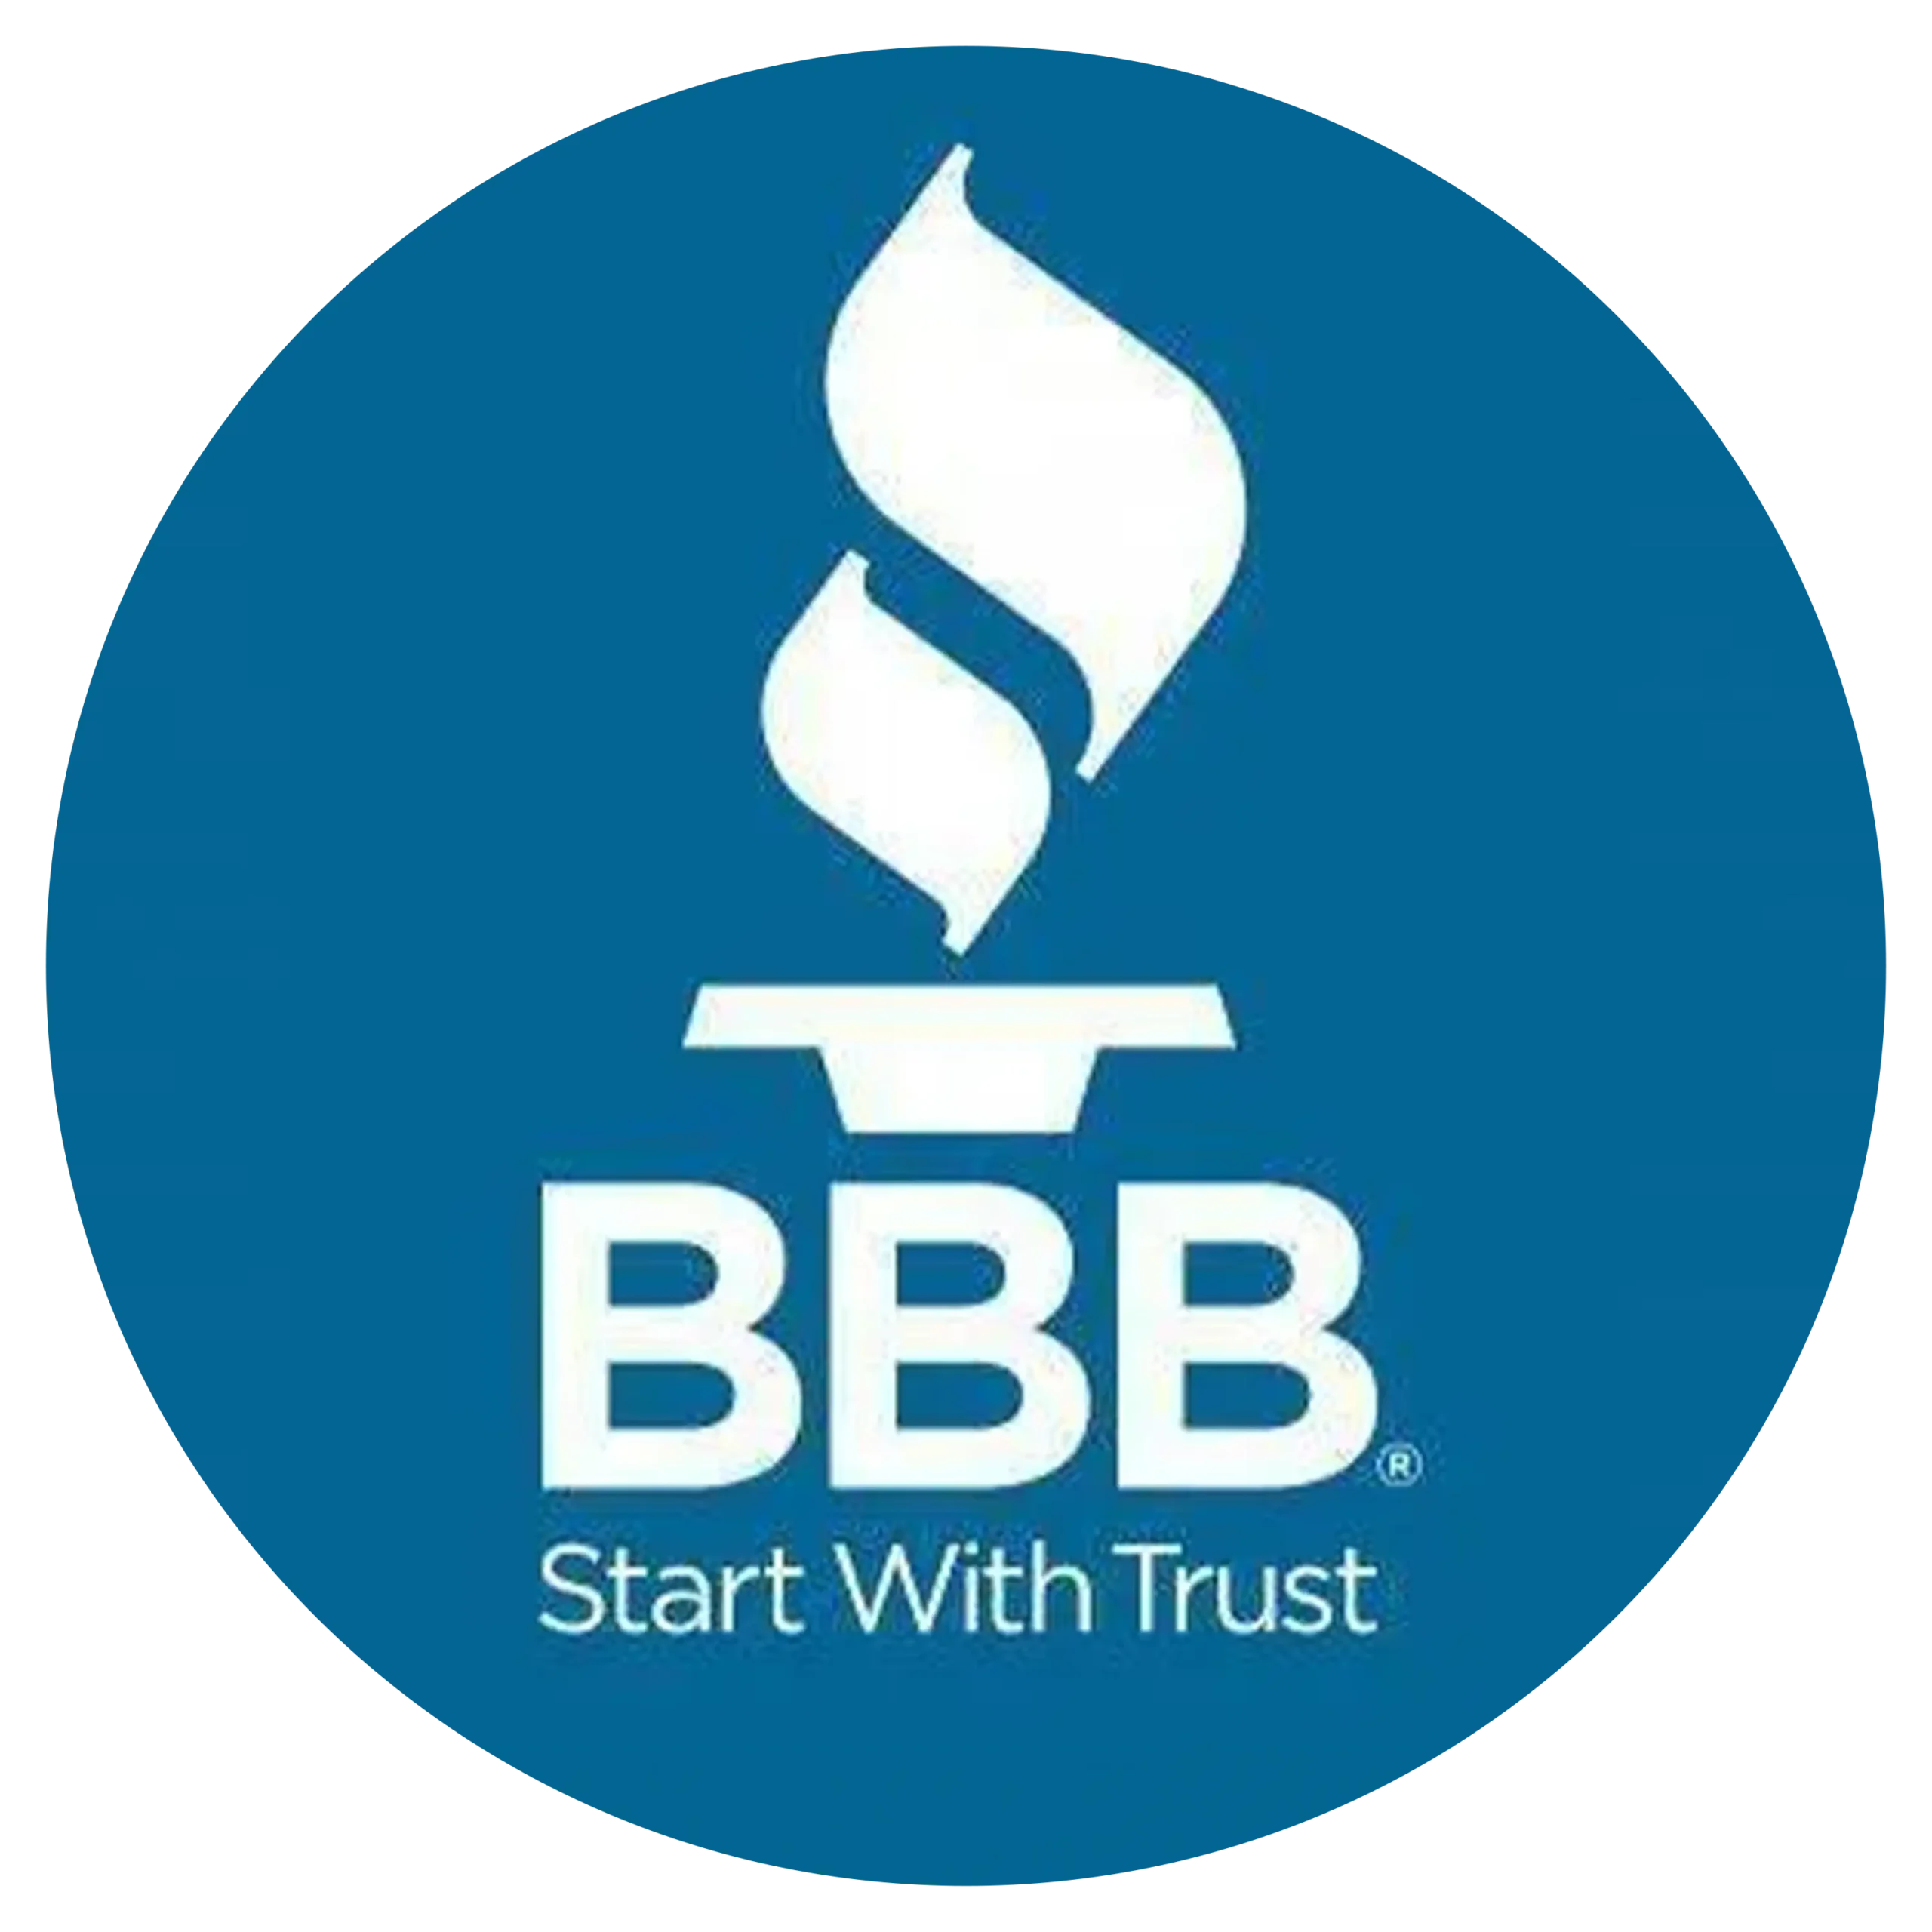 BBB Start With Trust